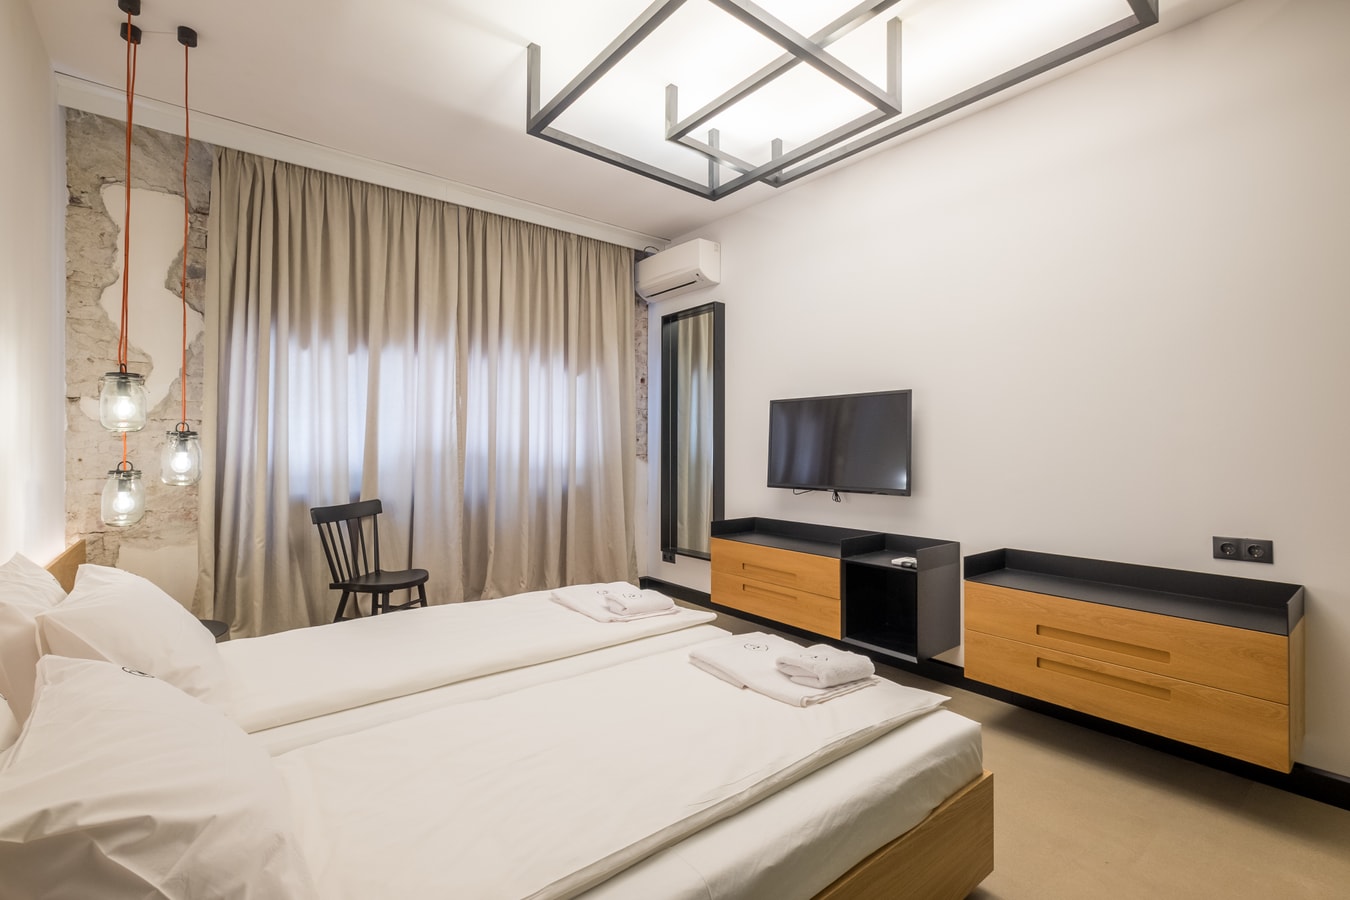 R34 Boutique Hotel - Deluxe Double Room №6 Flataway